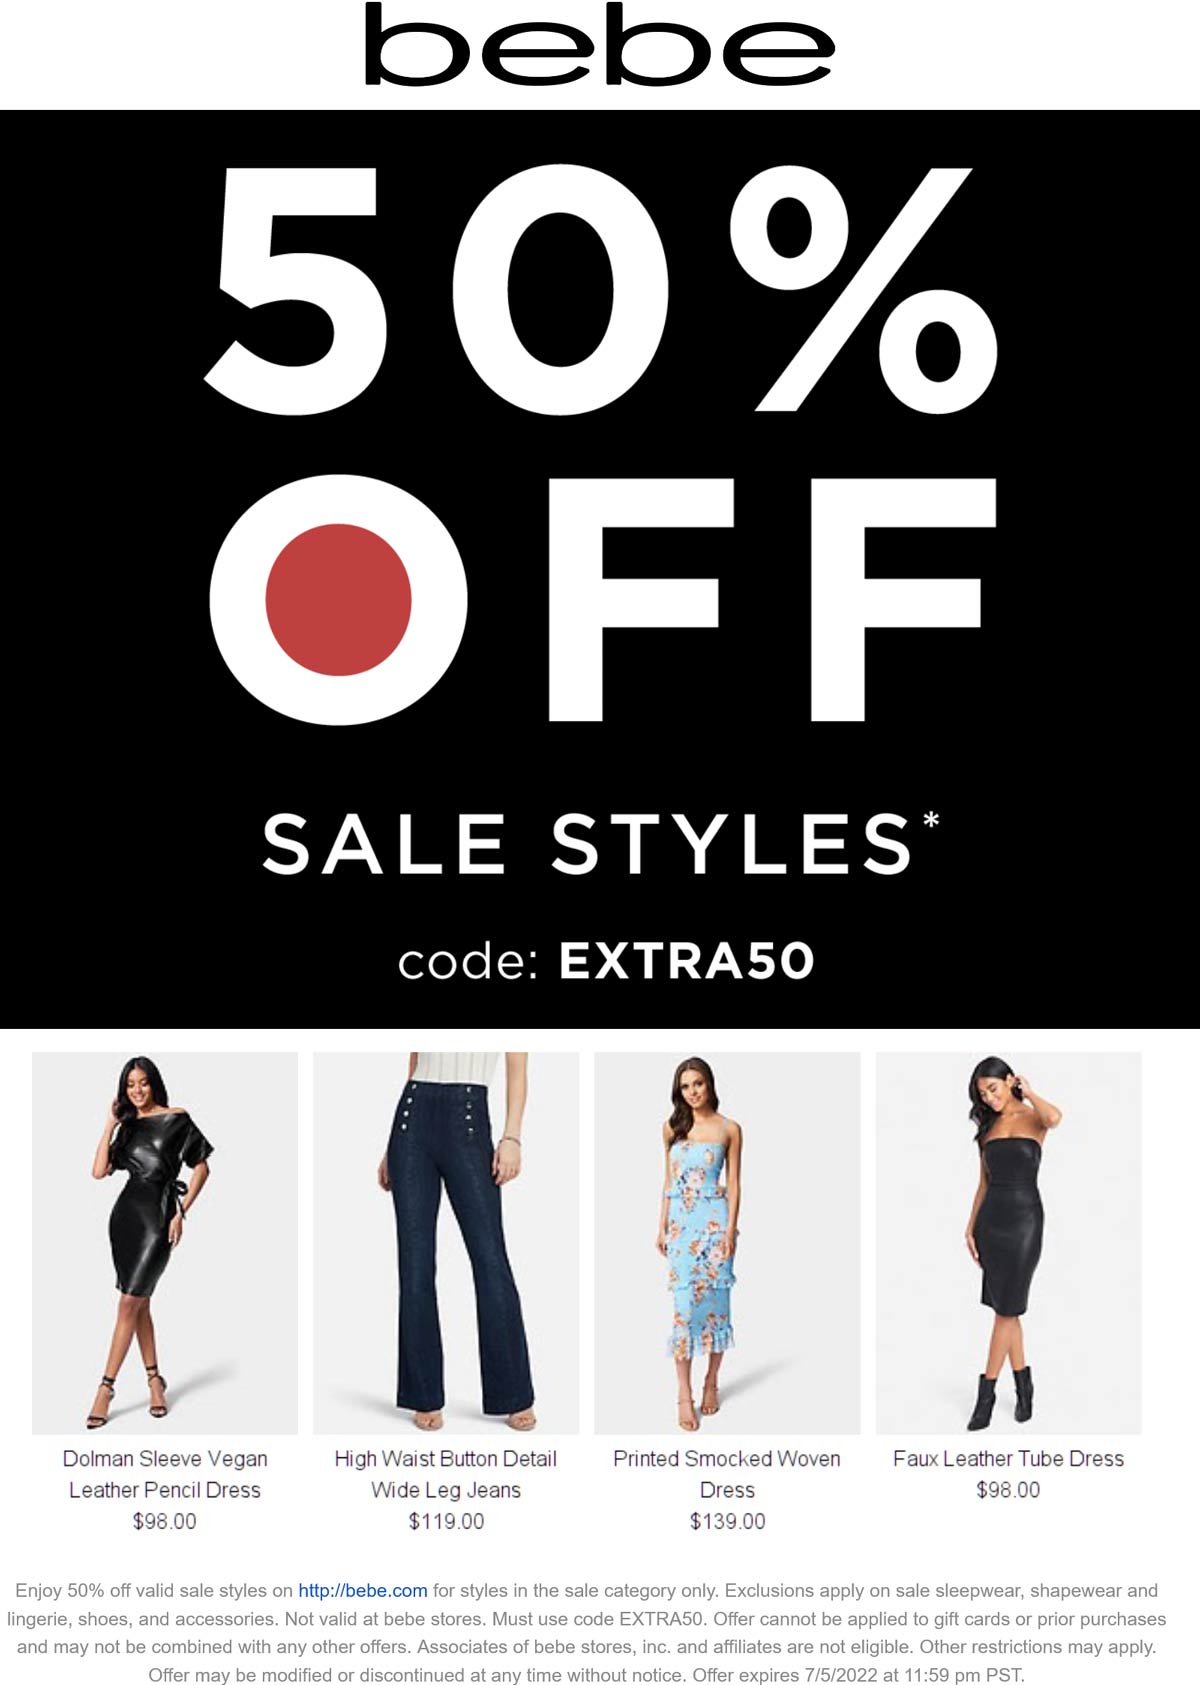 bebe stores Coupon  50% off sale styles online at bebe via promo code EXTRA50 #bebe 